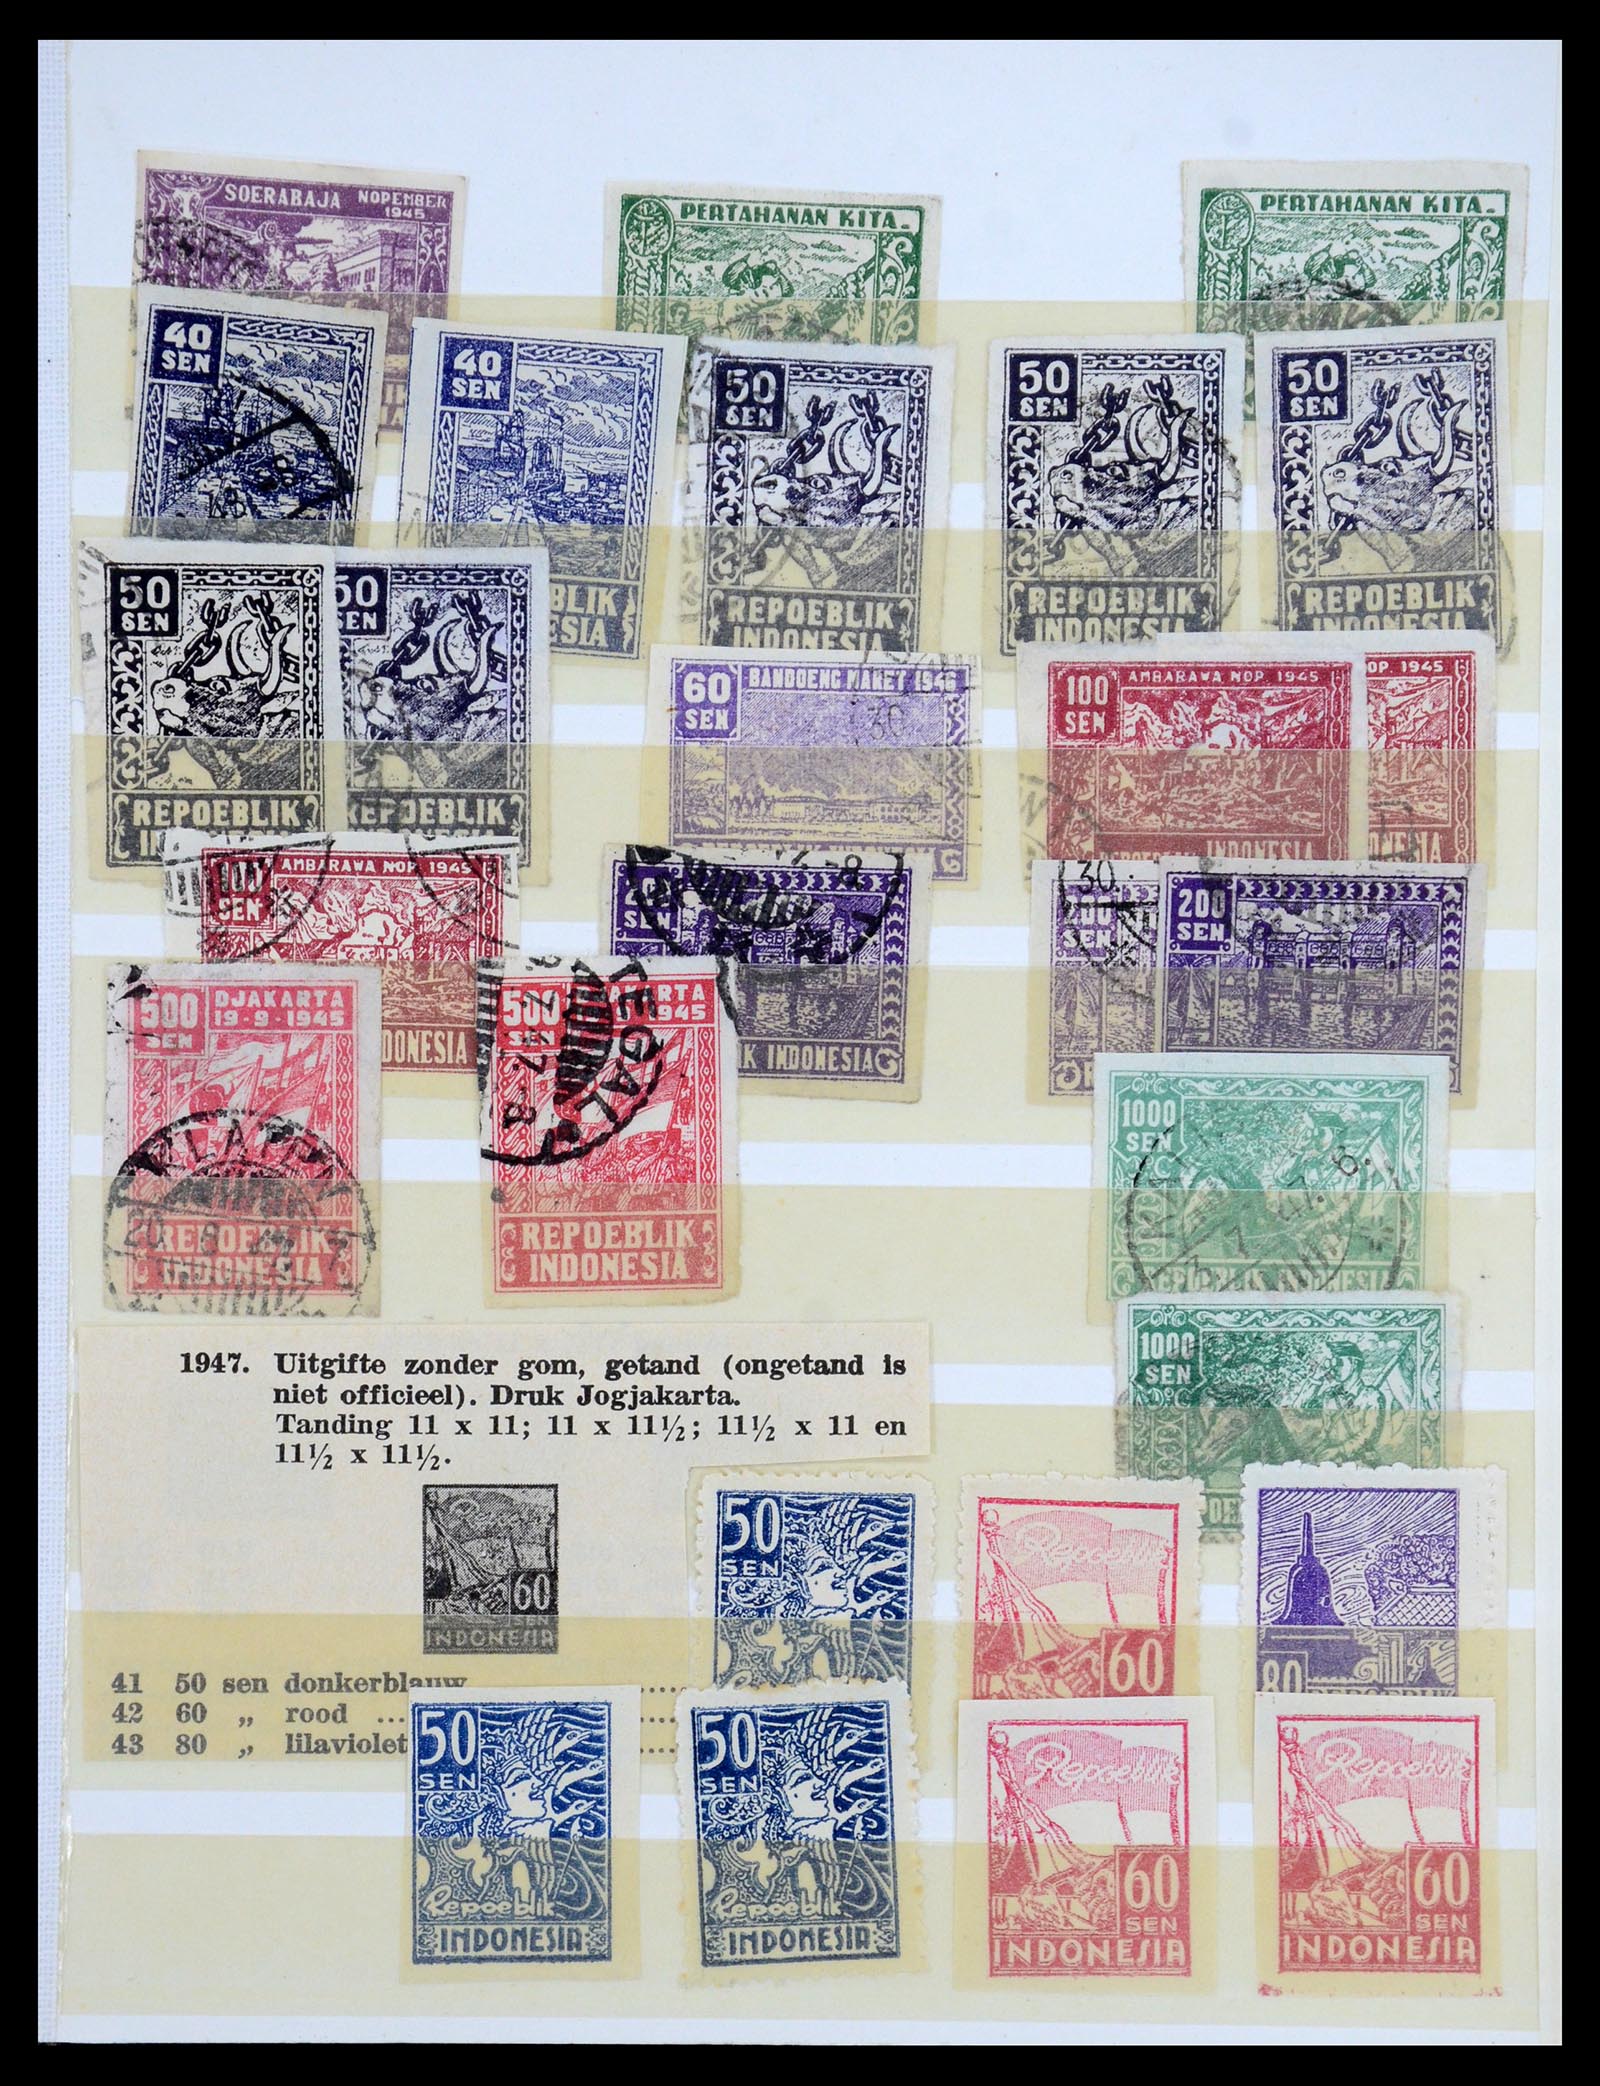 35757 017 - Stamp Collection 35757 Japanese occupation of Dutch east Indies en the i